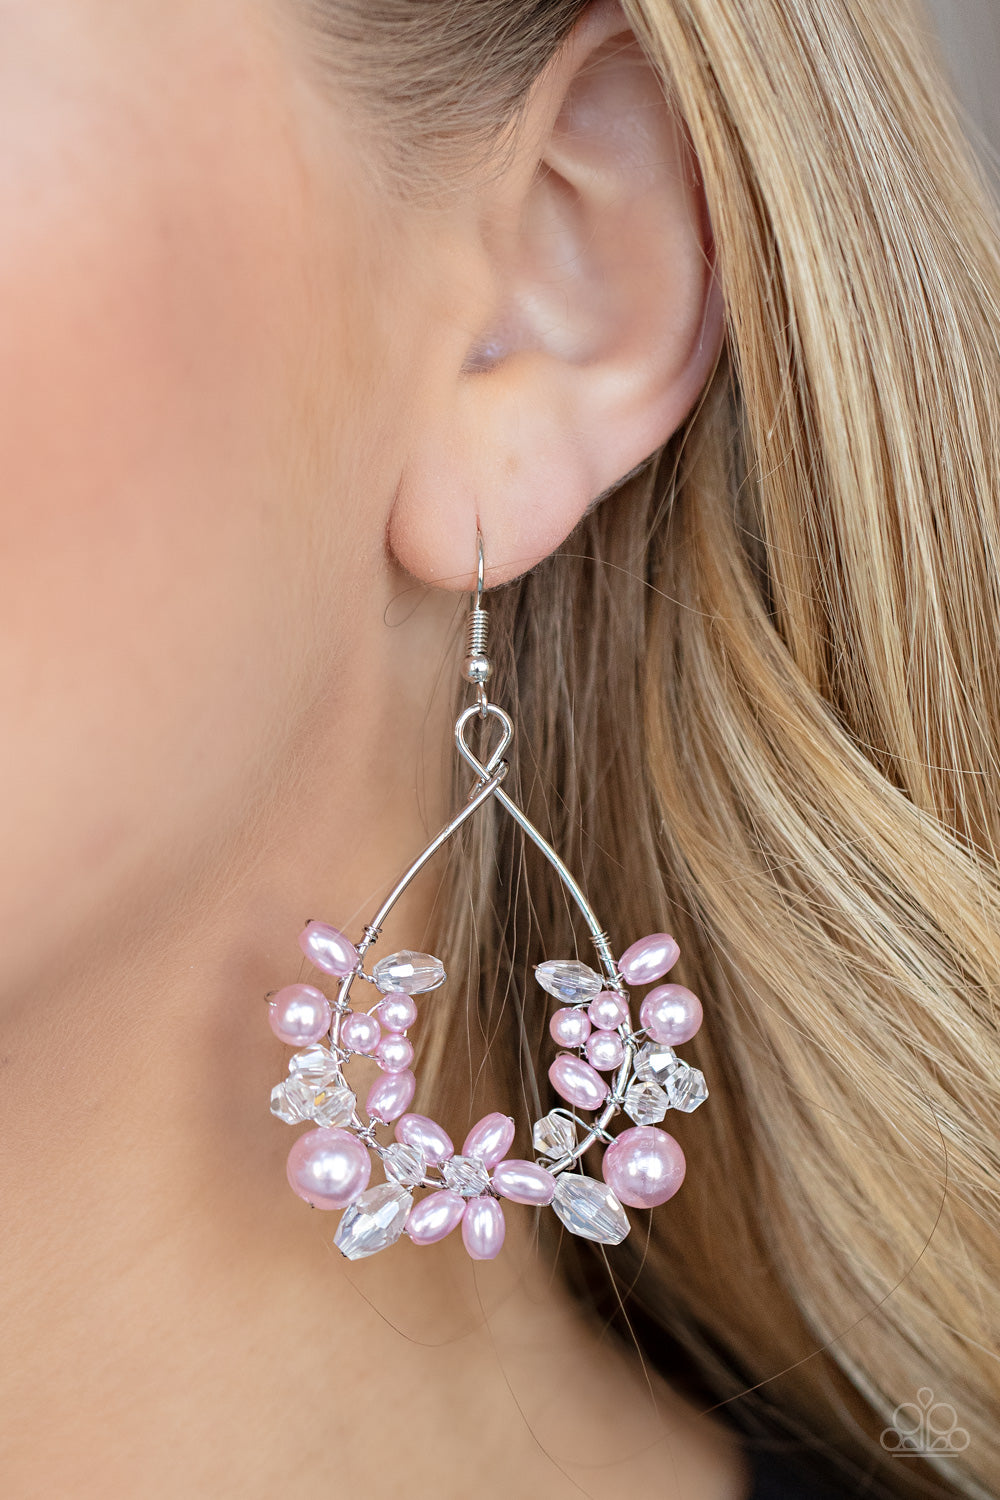 Marina Banquet - Pink and Silver Earrings- Paparazzi Accessories